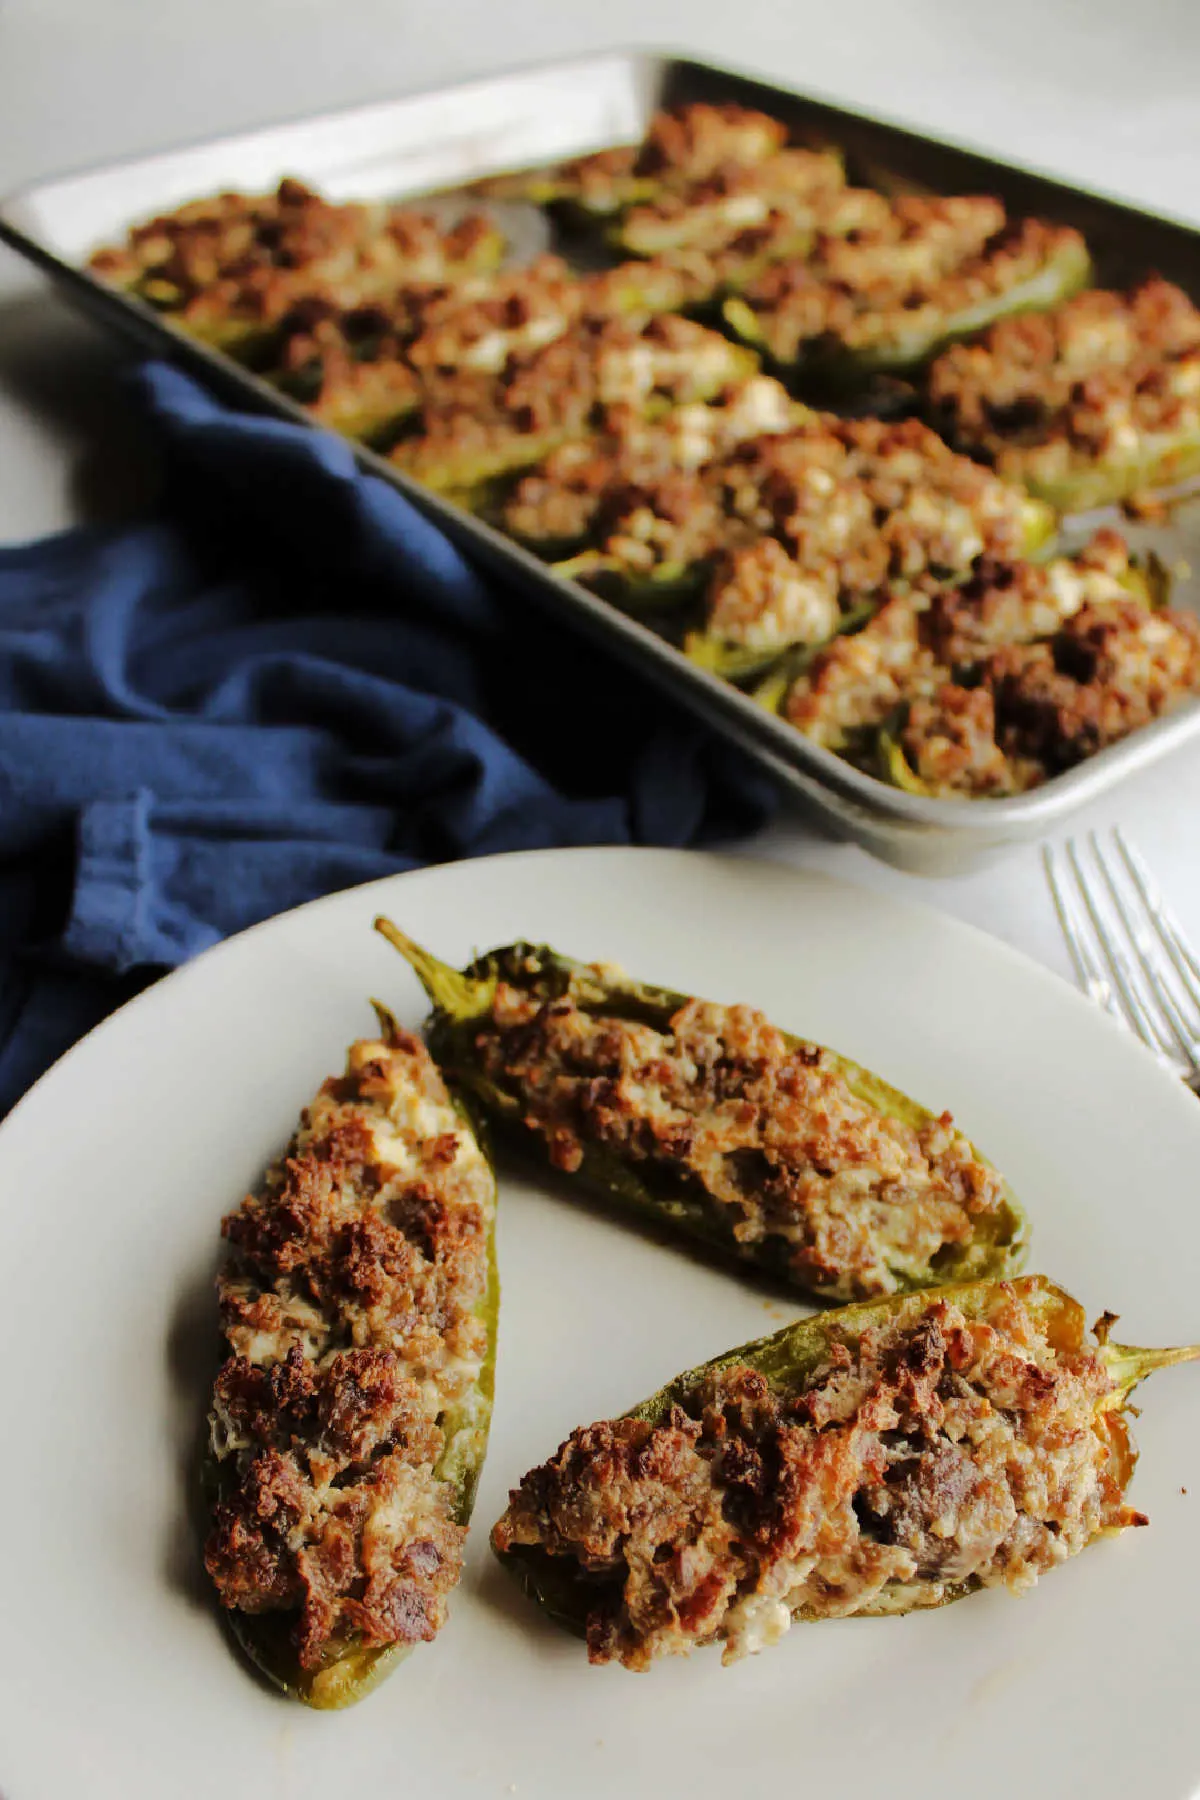 plate of creamy sausage stuffed jalapeno peppers in front of tray of remaining poppers.